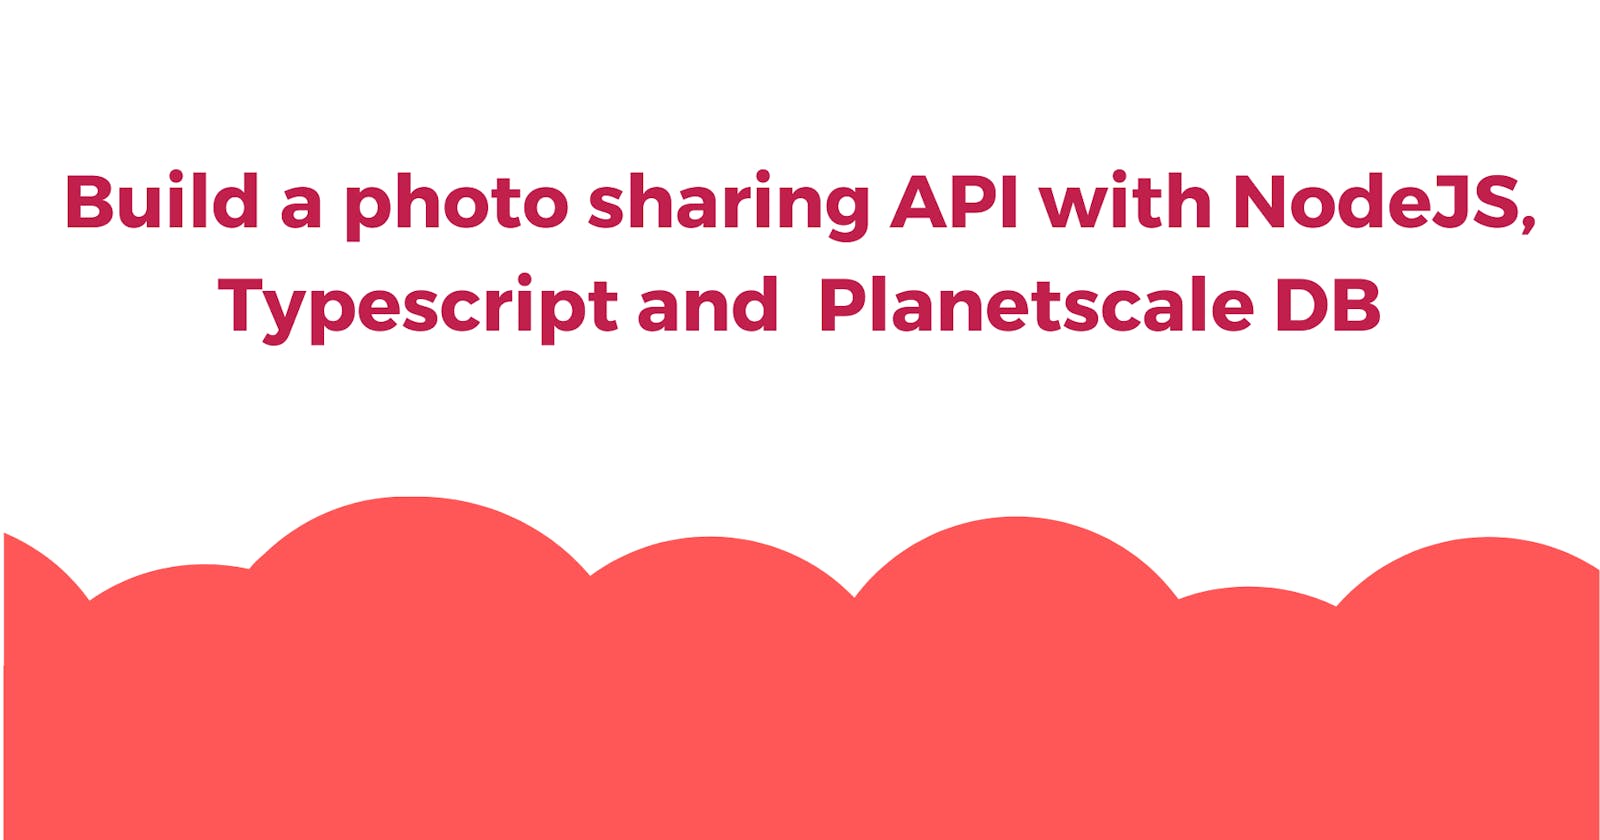 Build a photo-sharing API with NodeJS, Typescript, and Planetscale DB